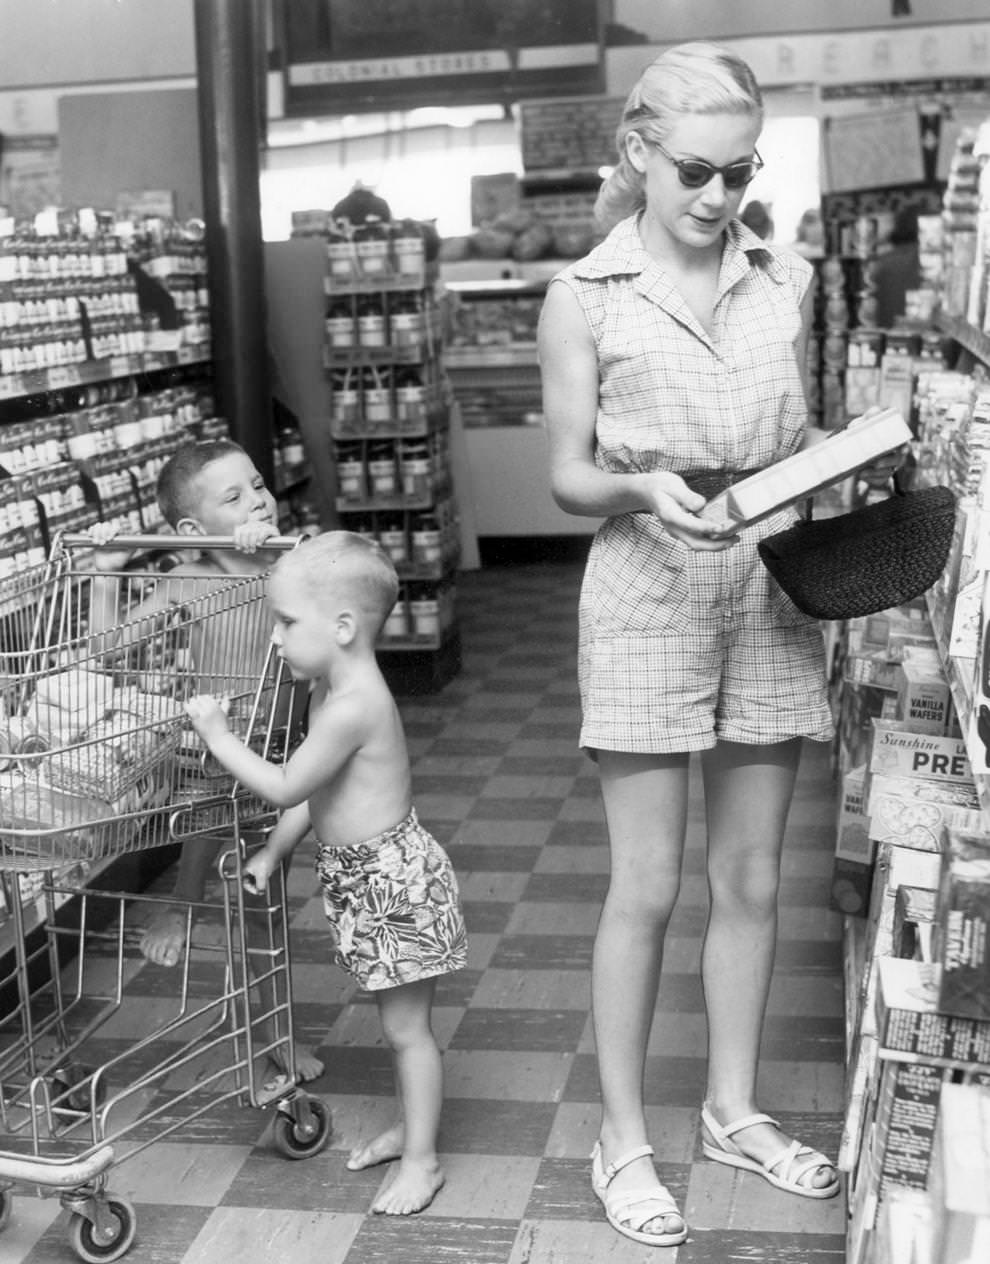 Richmond homemaker G.F. Sutliff sported casual attire while shopping at a neighborhood market, 1953.